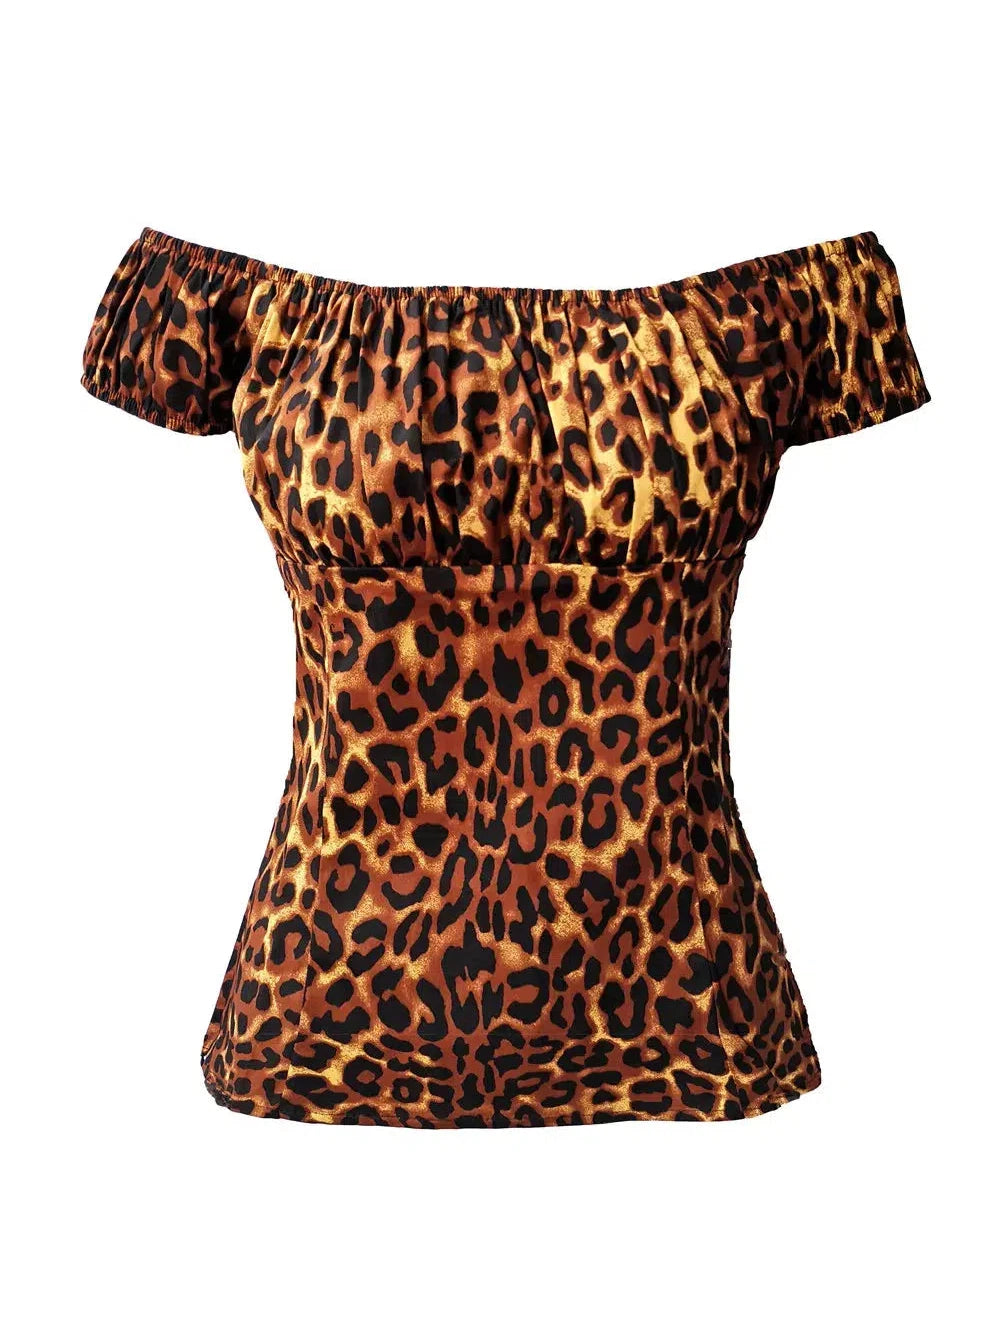 Leopard Peasant Style Top